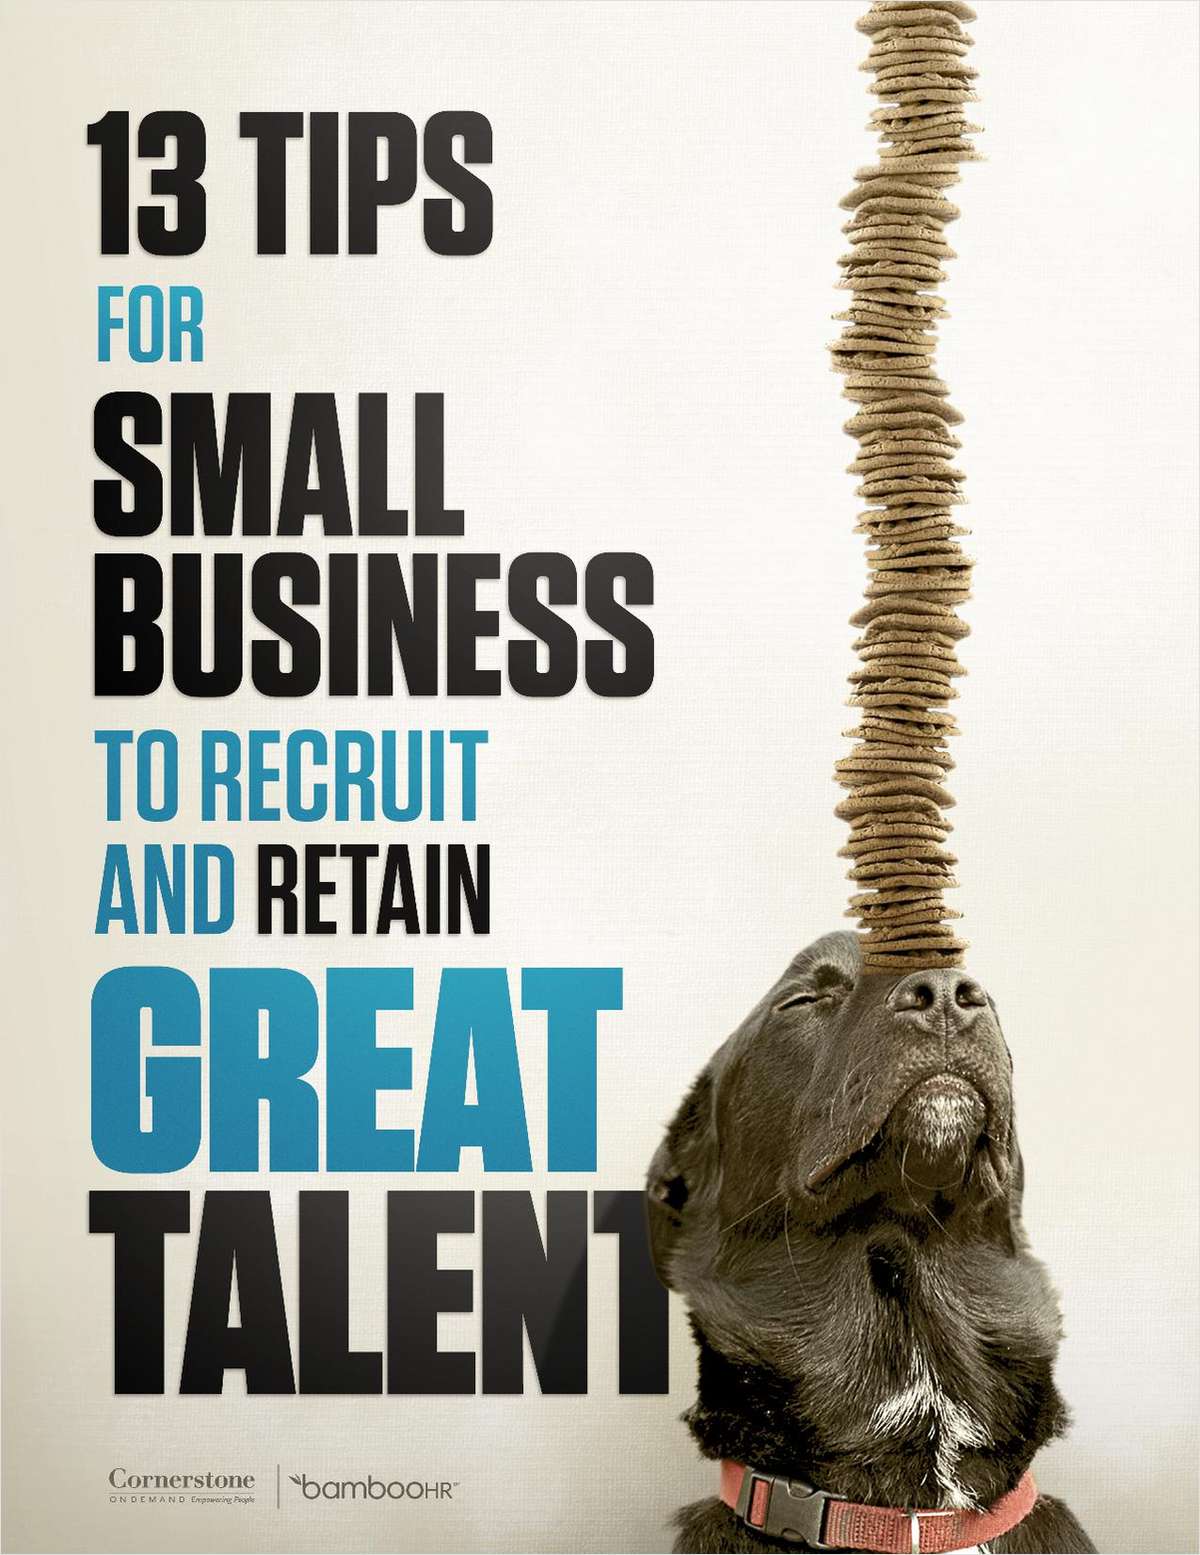 13 Tips for Small Business to Recruit and Retain Great Talent